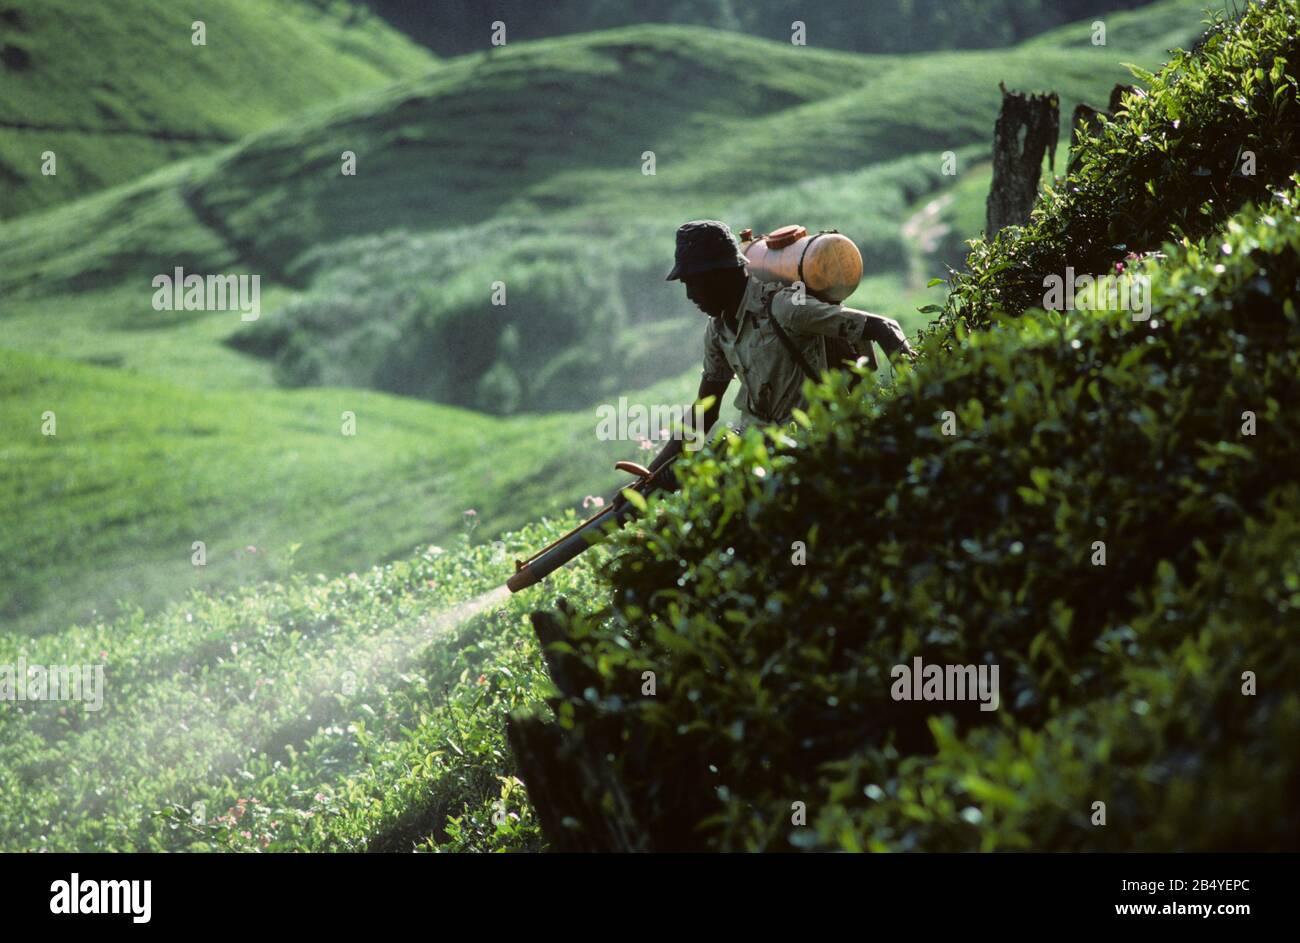 Worker with a portable backpack mist blower treating the crop in a steepo tea plantation, Cameron Highlands, Malaysia, February Stock Photo